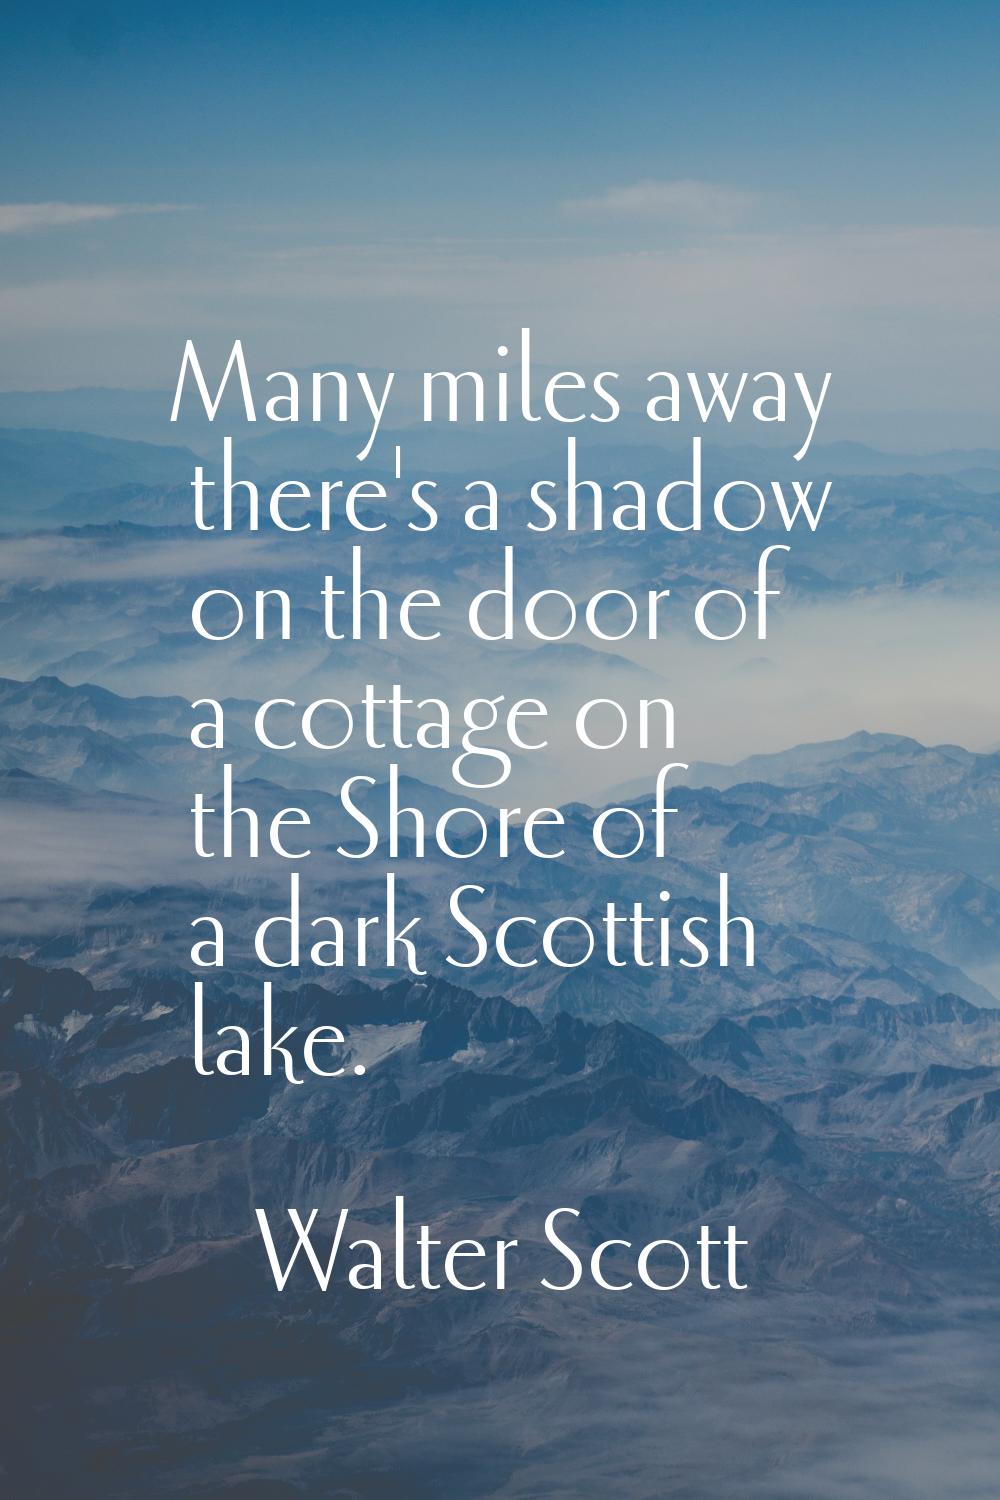 Many miles away there's a shadow on the door of a cottage on the Shore of a dark Scottish lake.